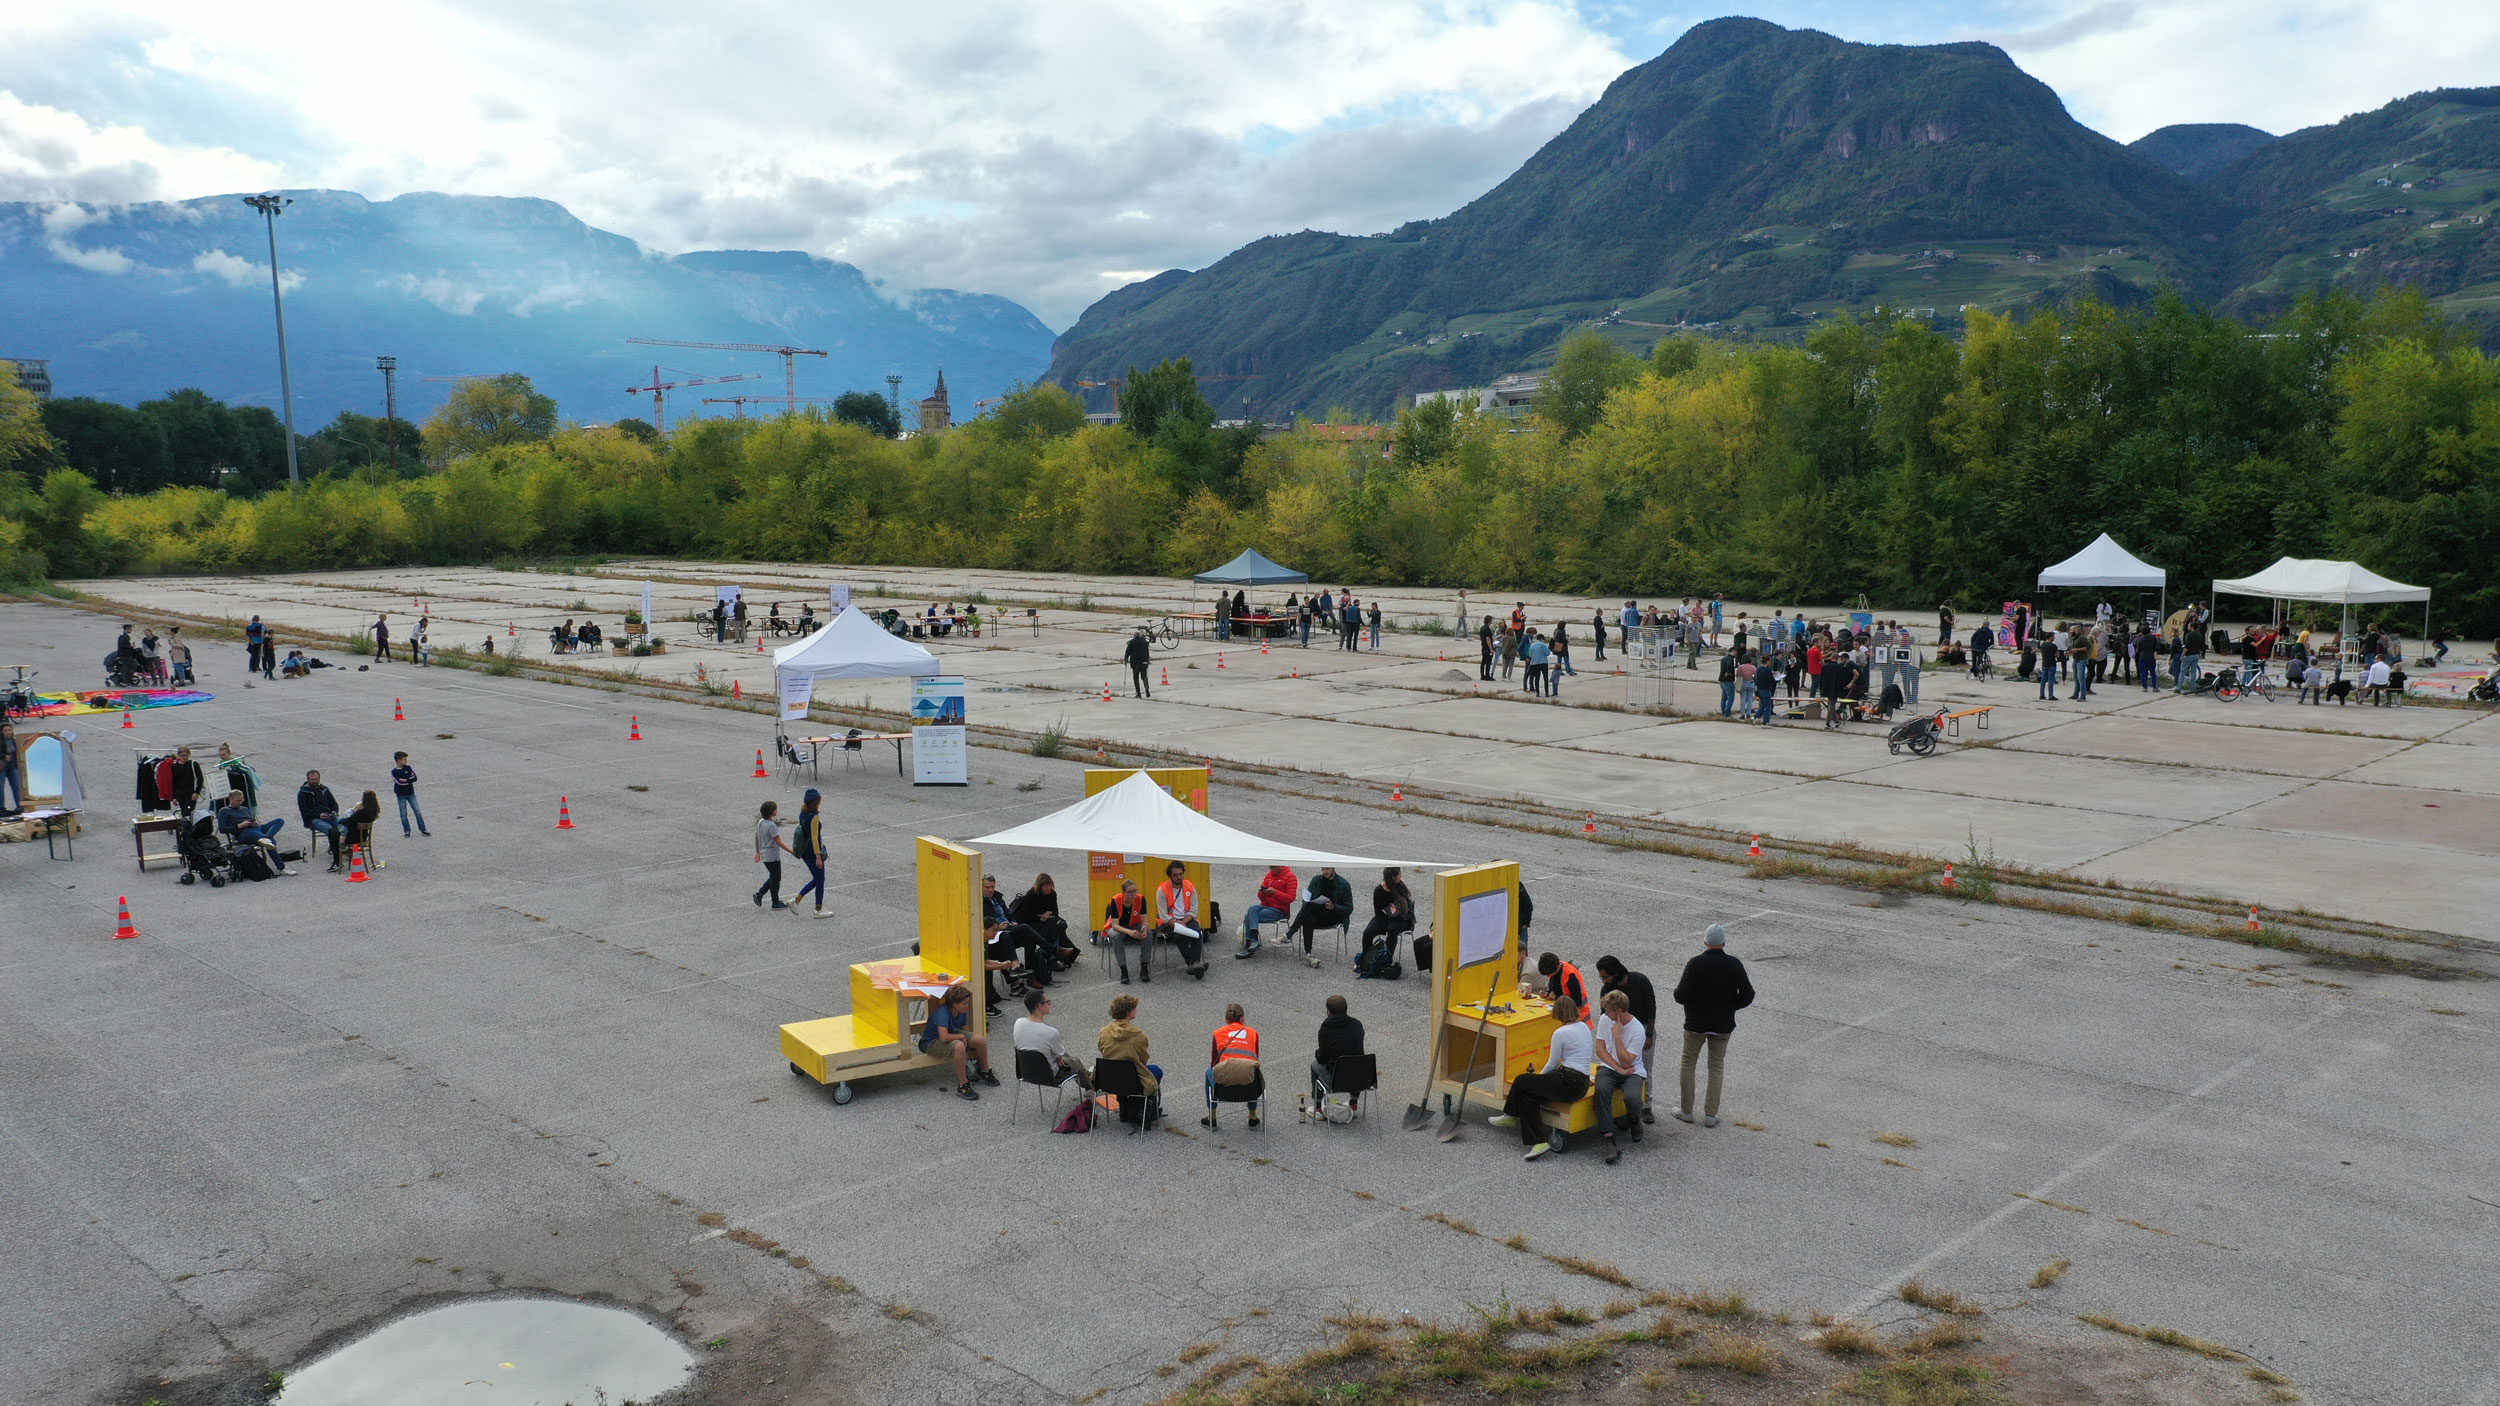 picture of an event in the area Citizens' Iniative for Placemaking in Bolzano